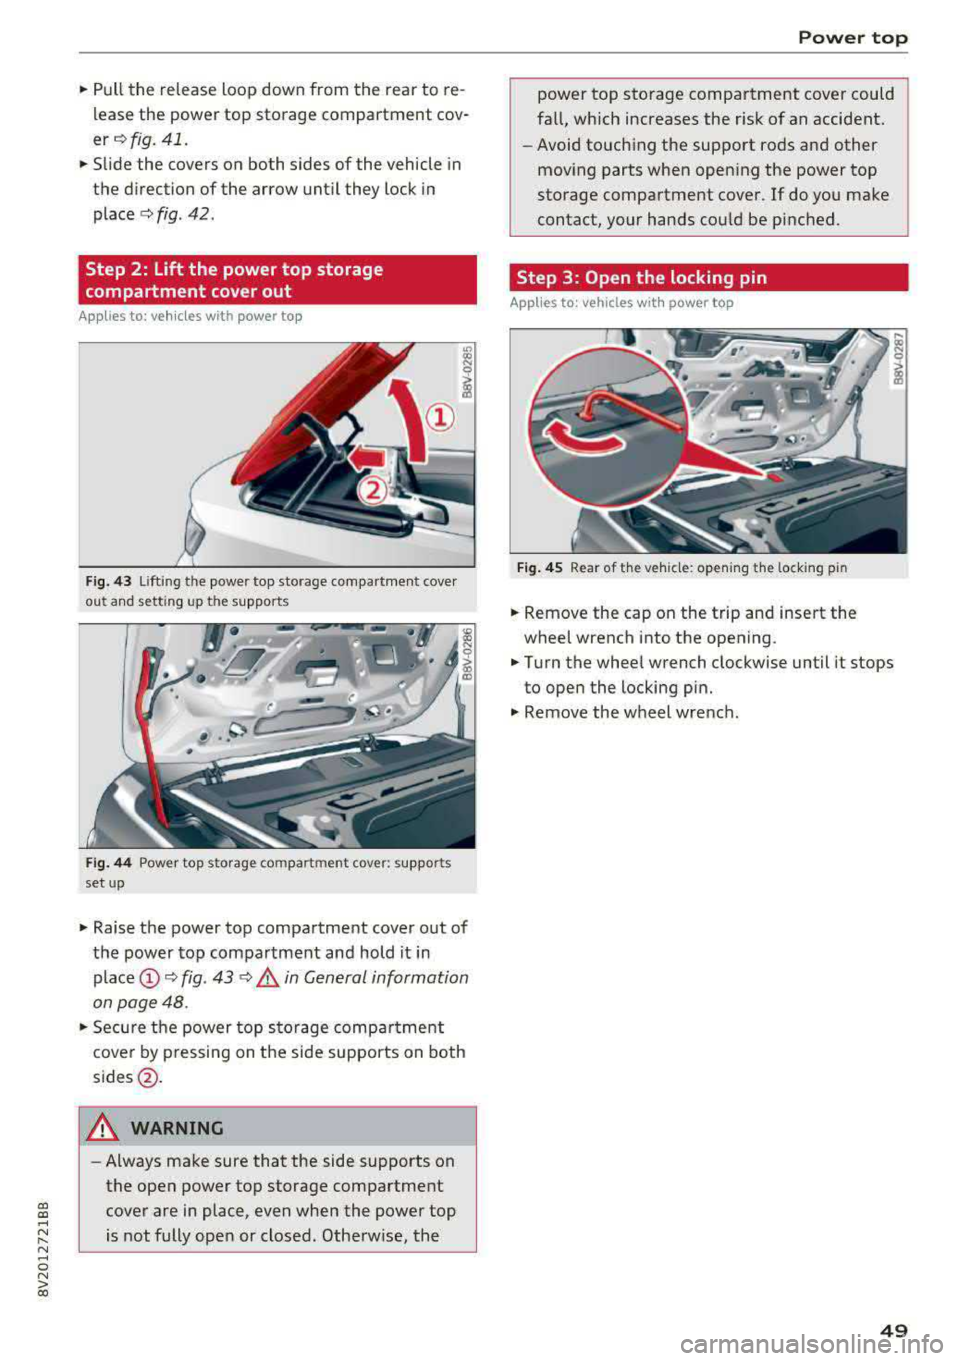 AUDI A3 SEDAN 2017 Workshop Manual a,  a, ..... N 
" N ..... 0 N > 00 
.. Pull  the  release  loop  down  from  the  rear  to re­
lease  the  power  top  storage  compartment  cov­ 
er ¢ fig.  41  . 
.. Slide  the  covers  on  both 